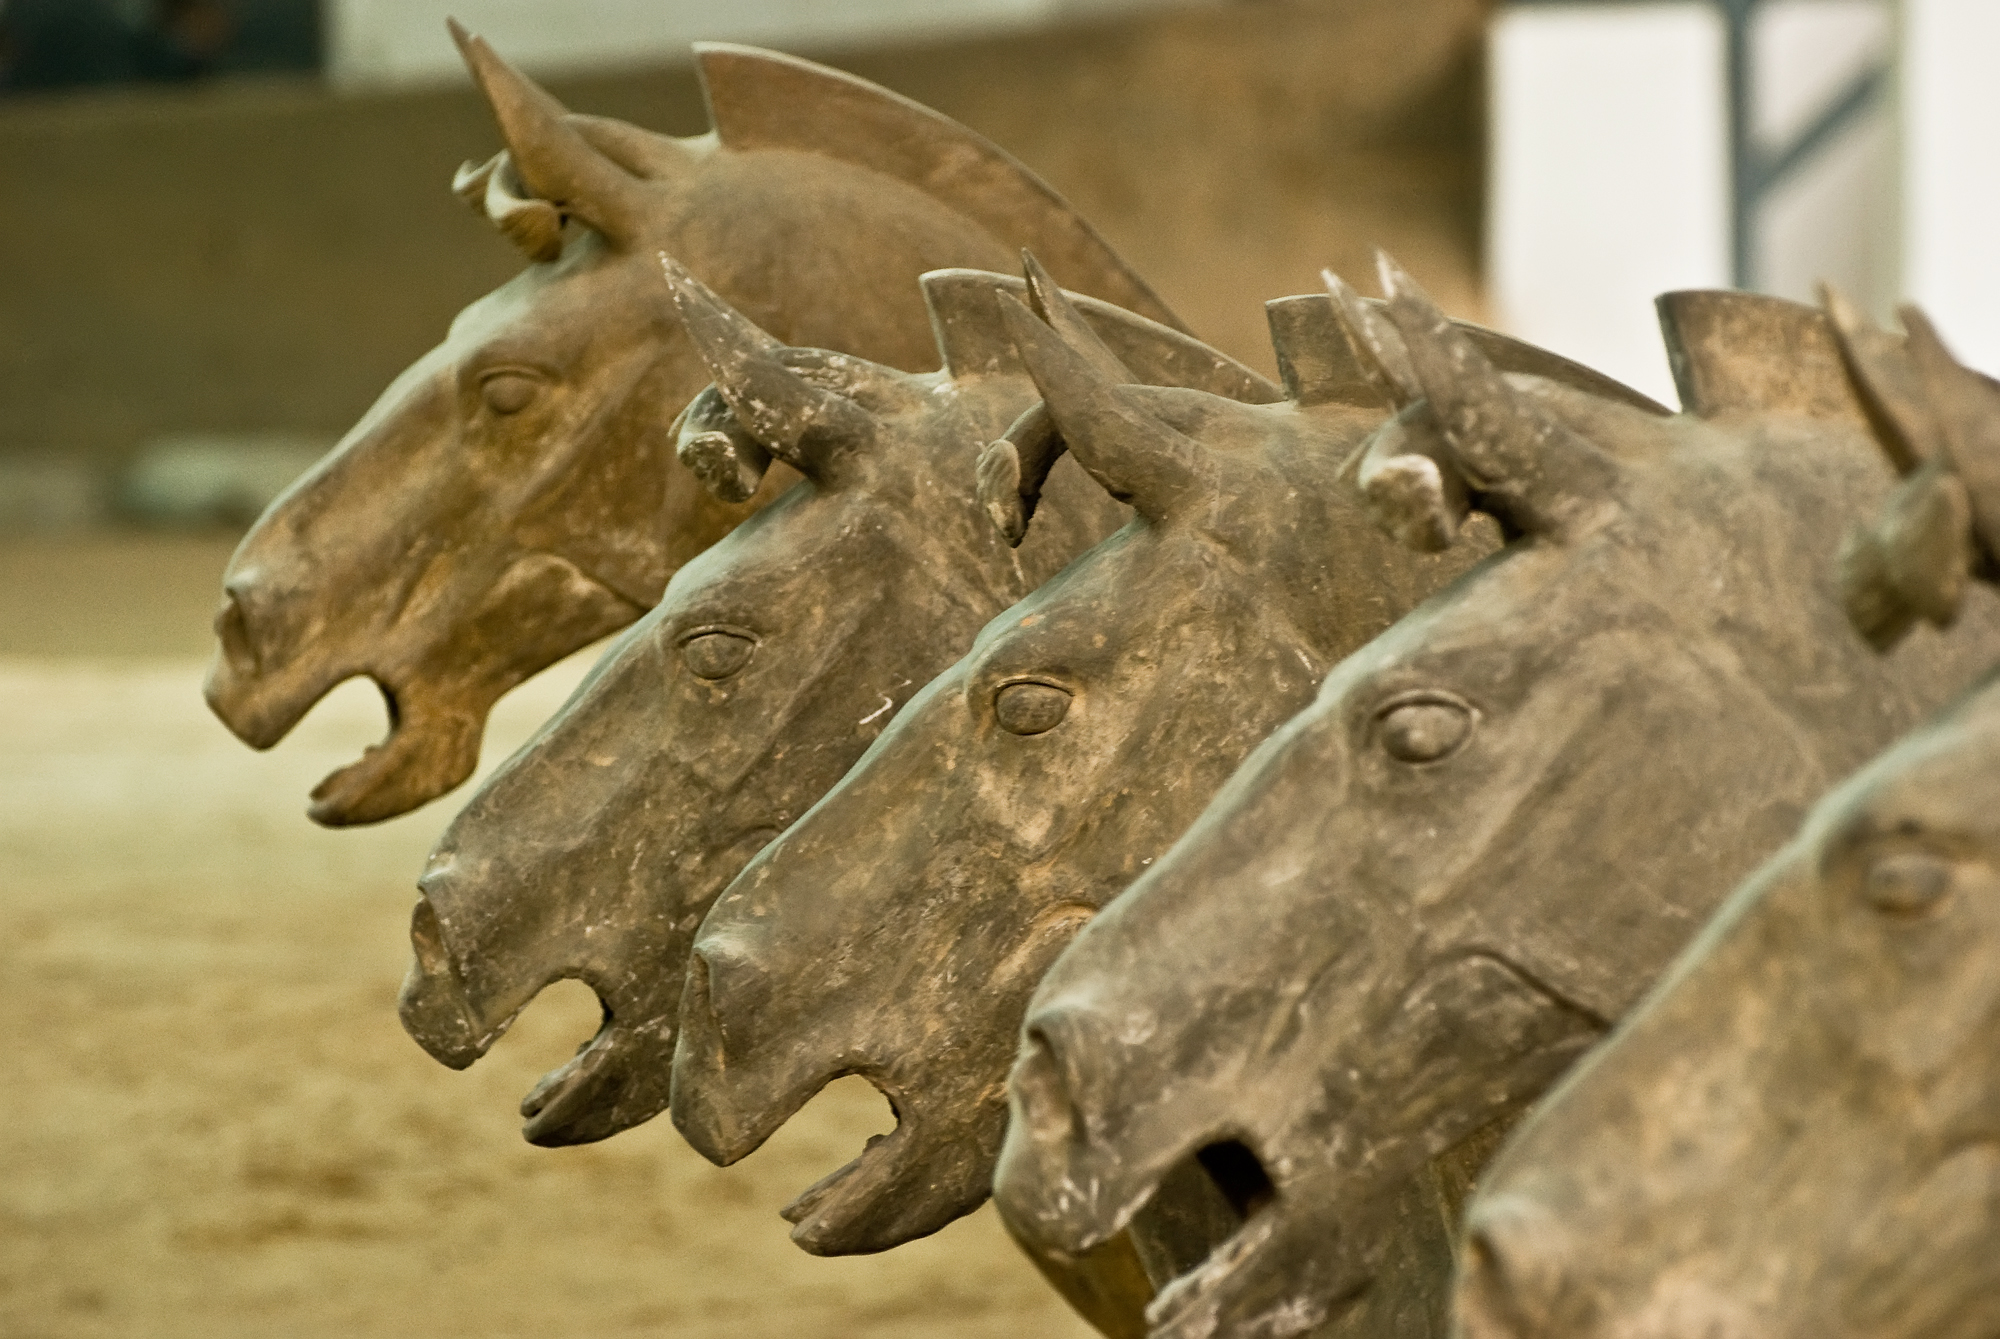 there are many horse heads lined up by each other